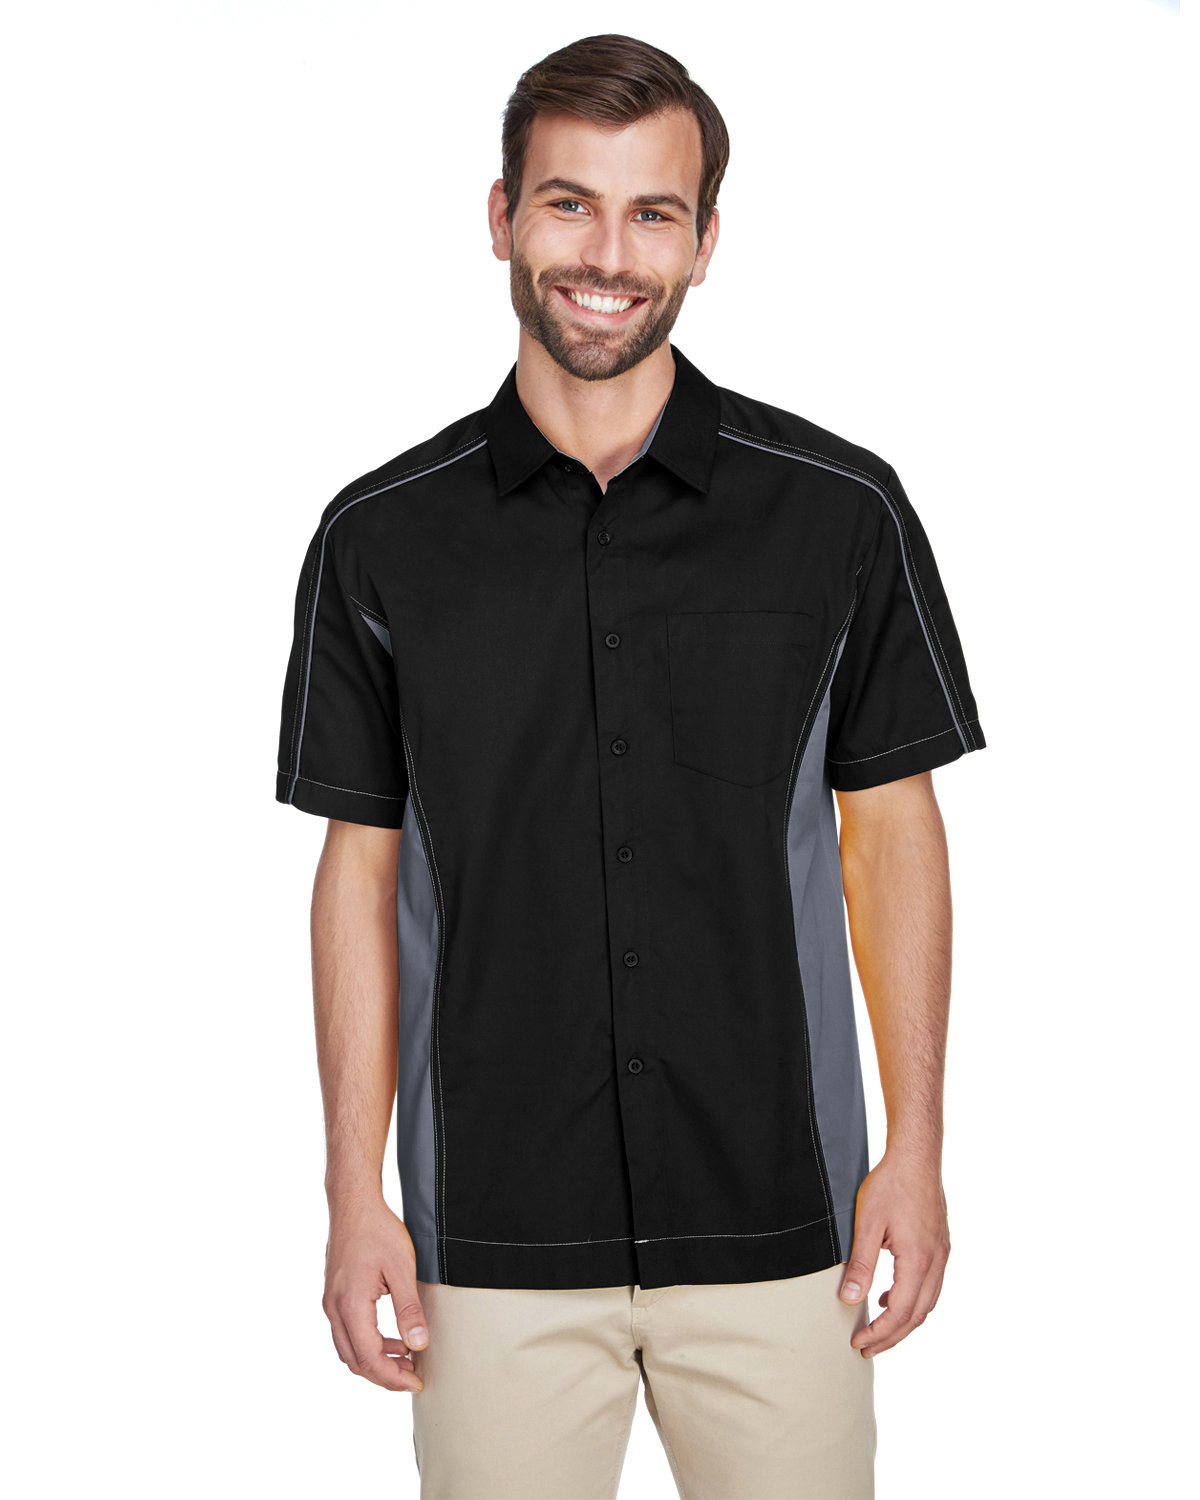 North End 87042 - Men's Fuse Colorblock Twill Shirt